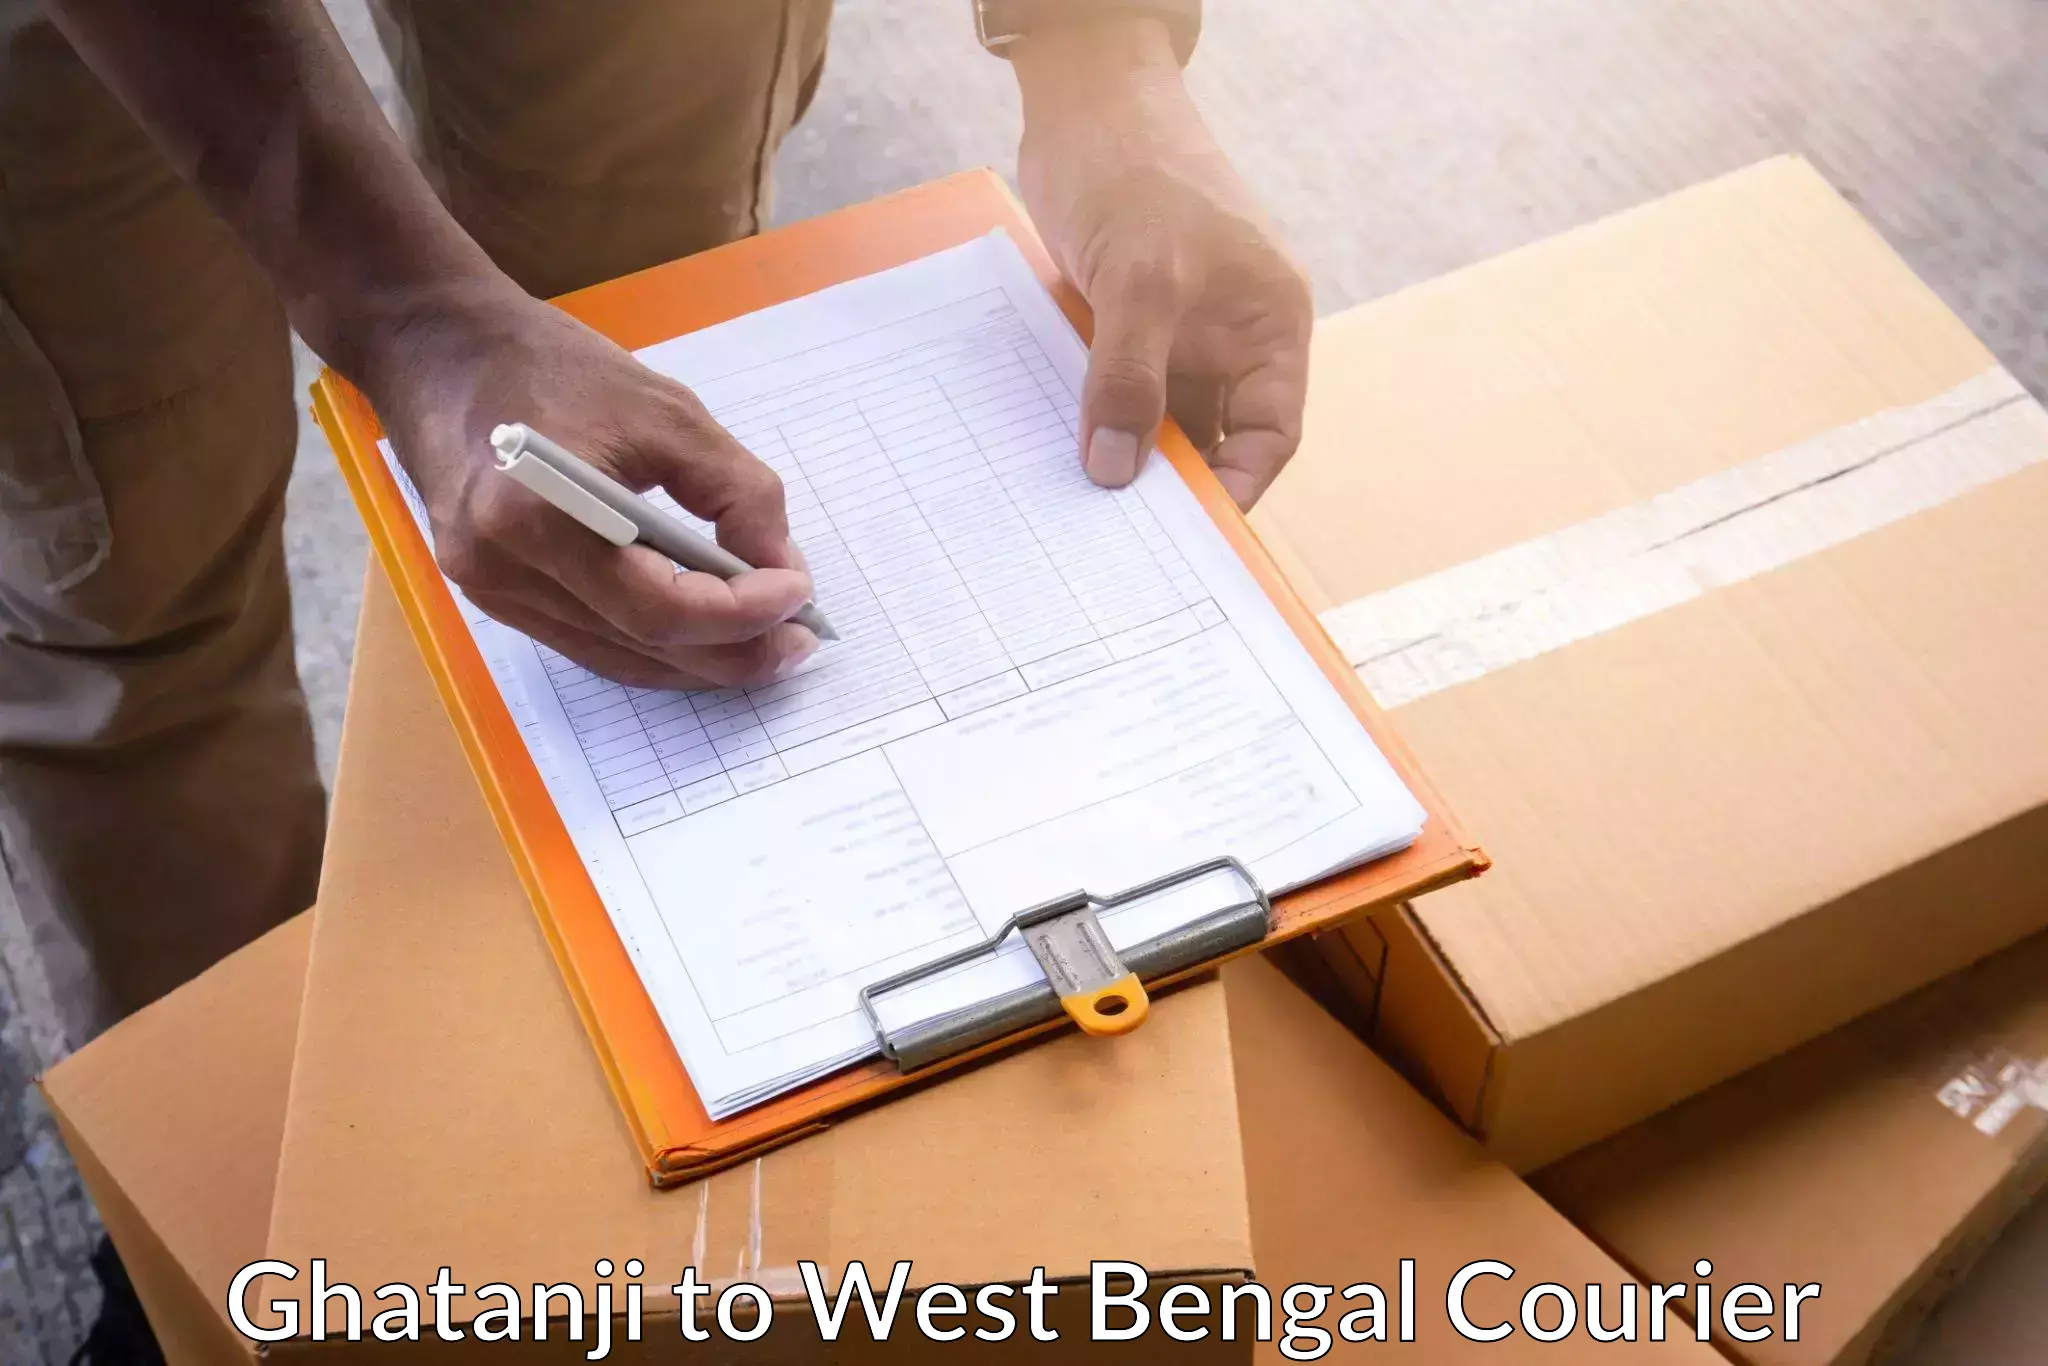 Bulk courier orders Ghatanji to West Bengal